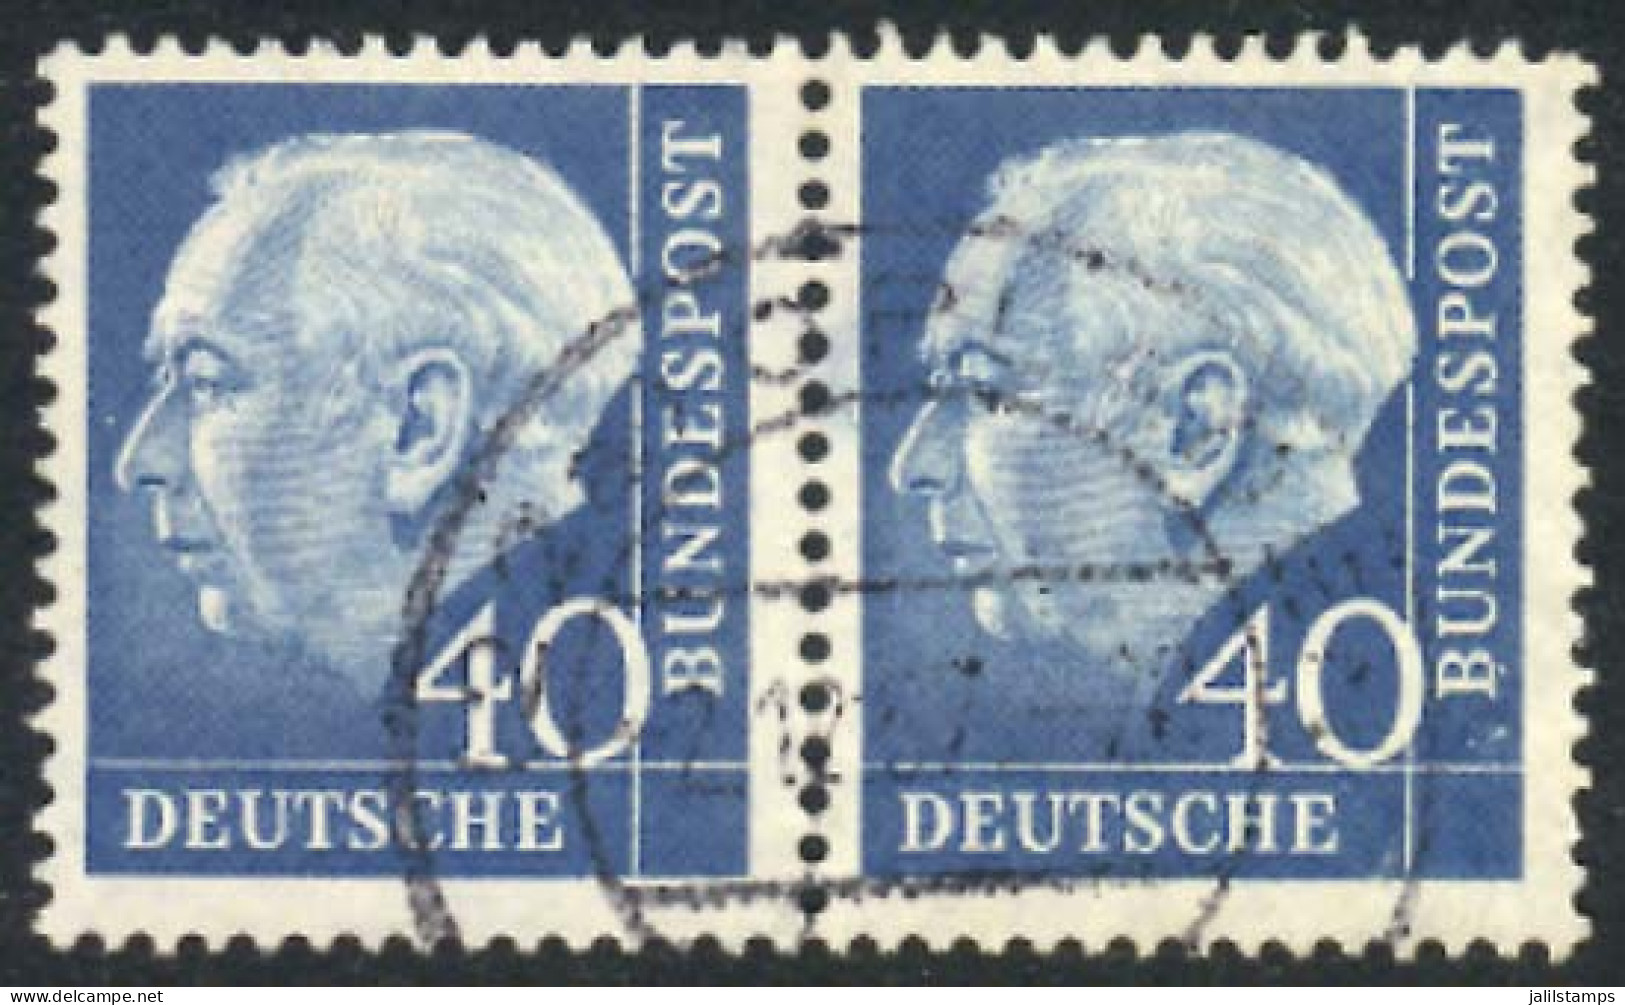 WEST GERMANY: Michel 260x, Used HORIZONTAL Pair, Fine Quality, Catalog Value Euros 200, Low Start! - Gebraucht